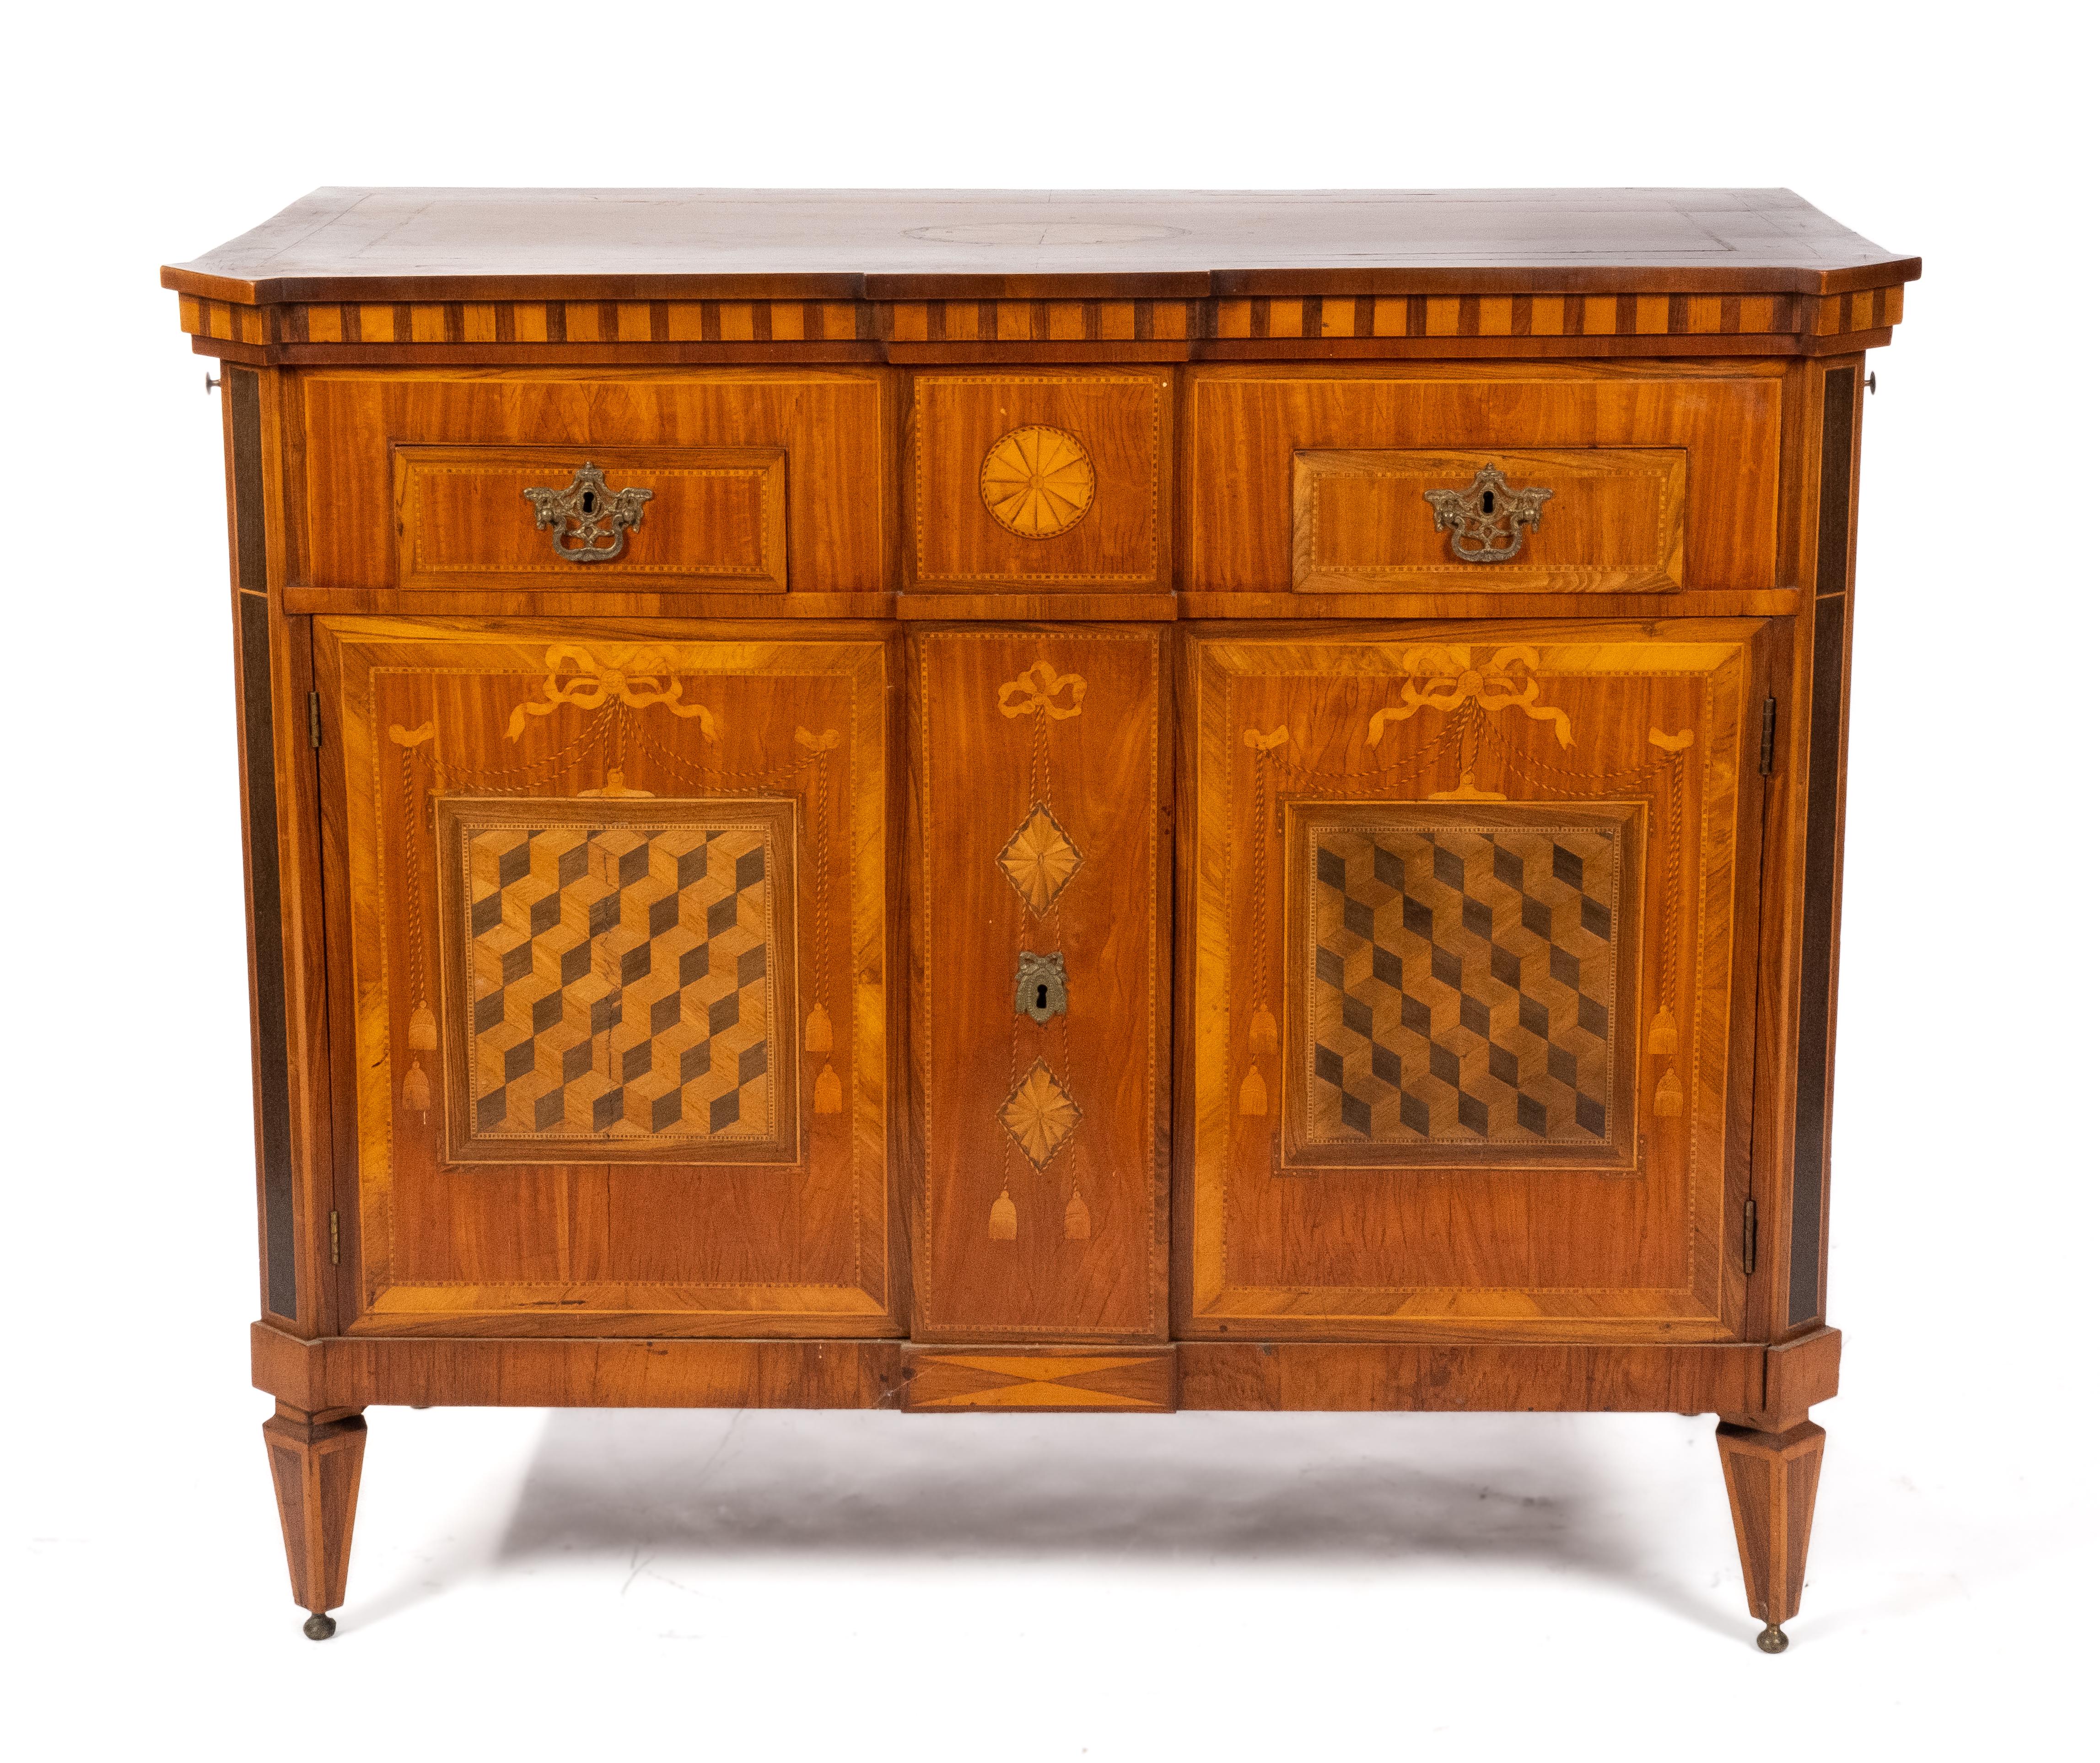 A Dutch satinwood, tulipwood, kingwood and fruitwood marquetry and parquetry sideboard 'klapbuffet'